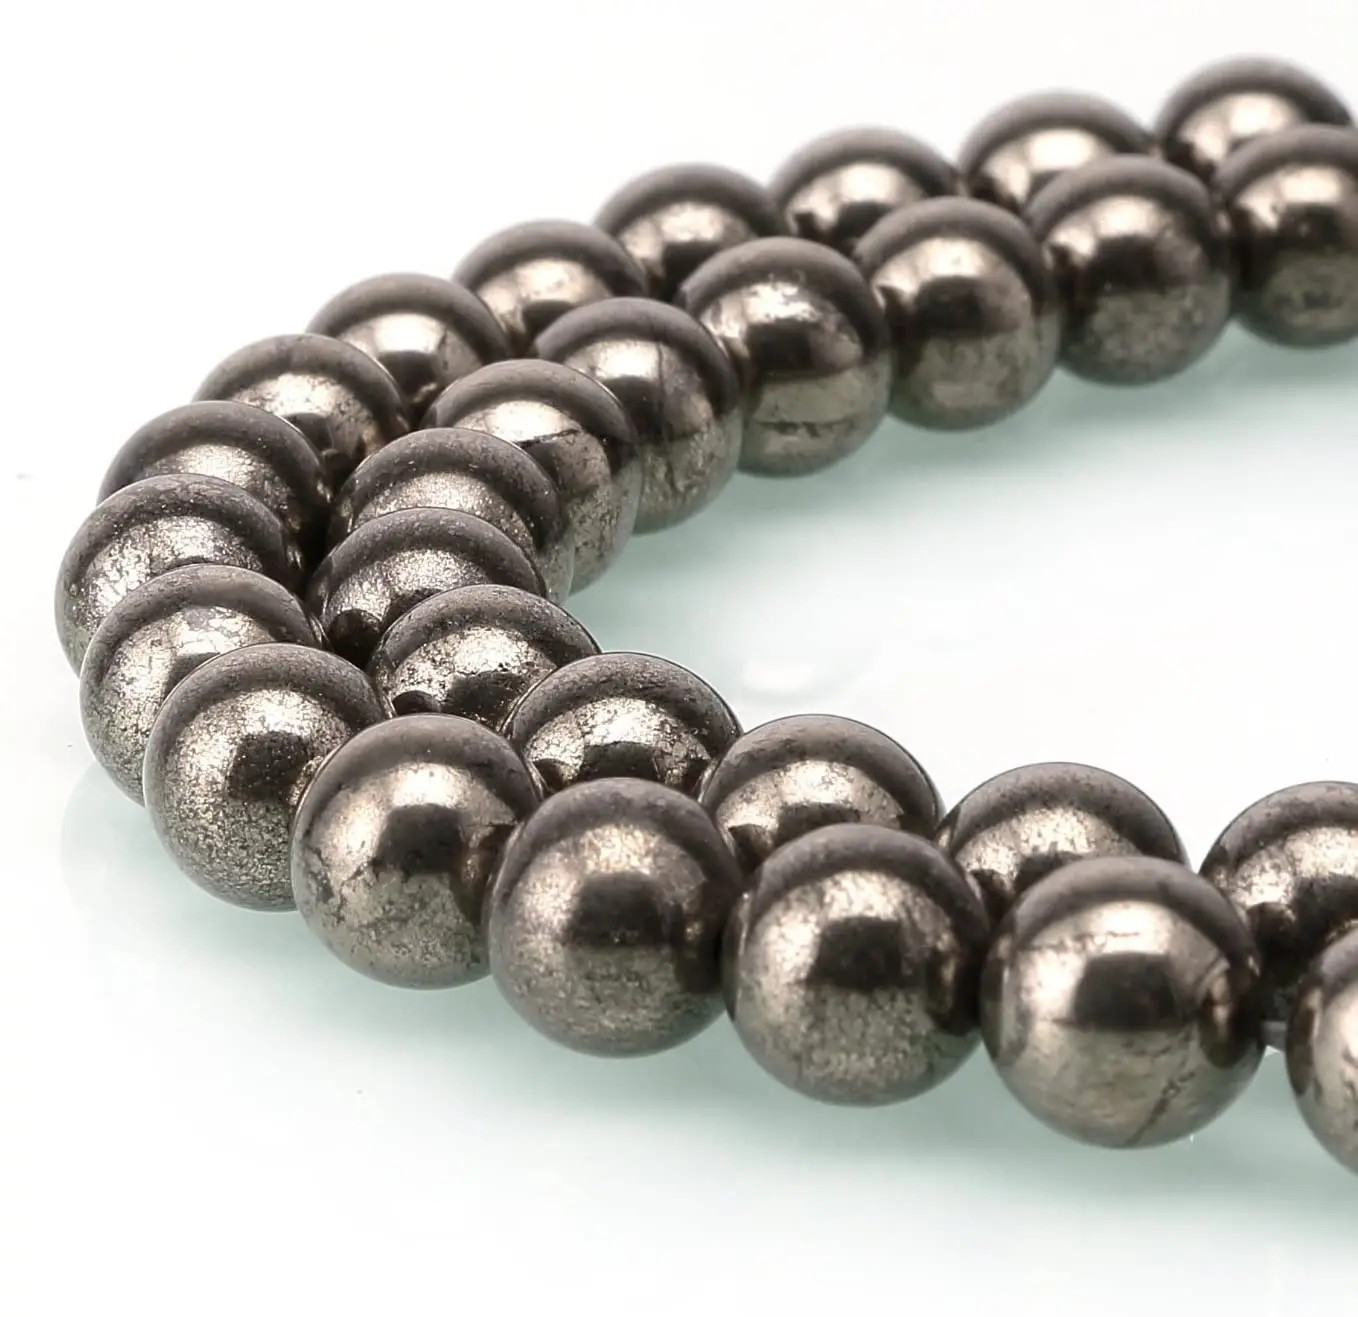 

Natural Pyrite Gemstone 8mm Smooth Round Loose 50pcs Beads 1 Strand for Bracelet Necklace Earrings Jewelry Making